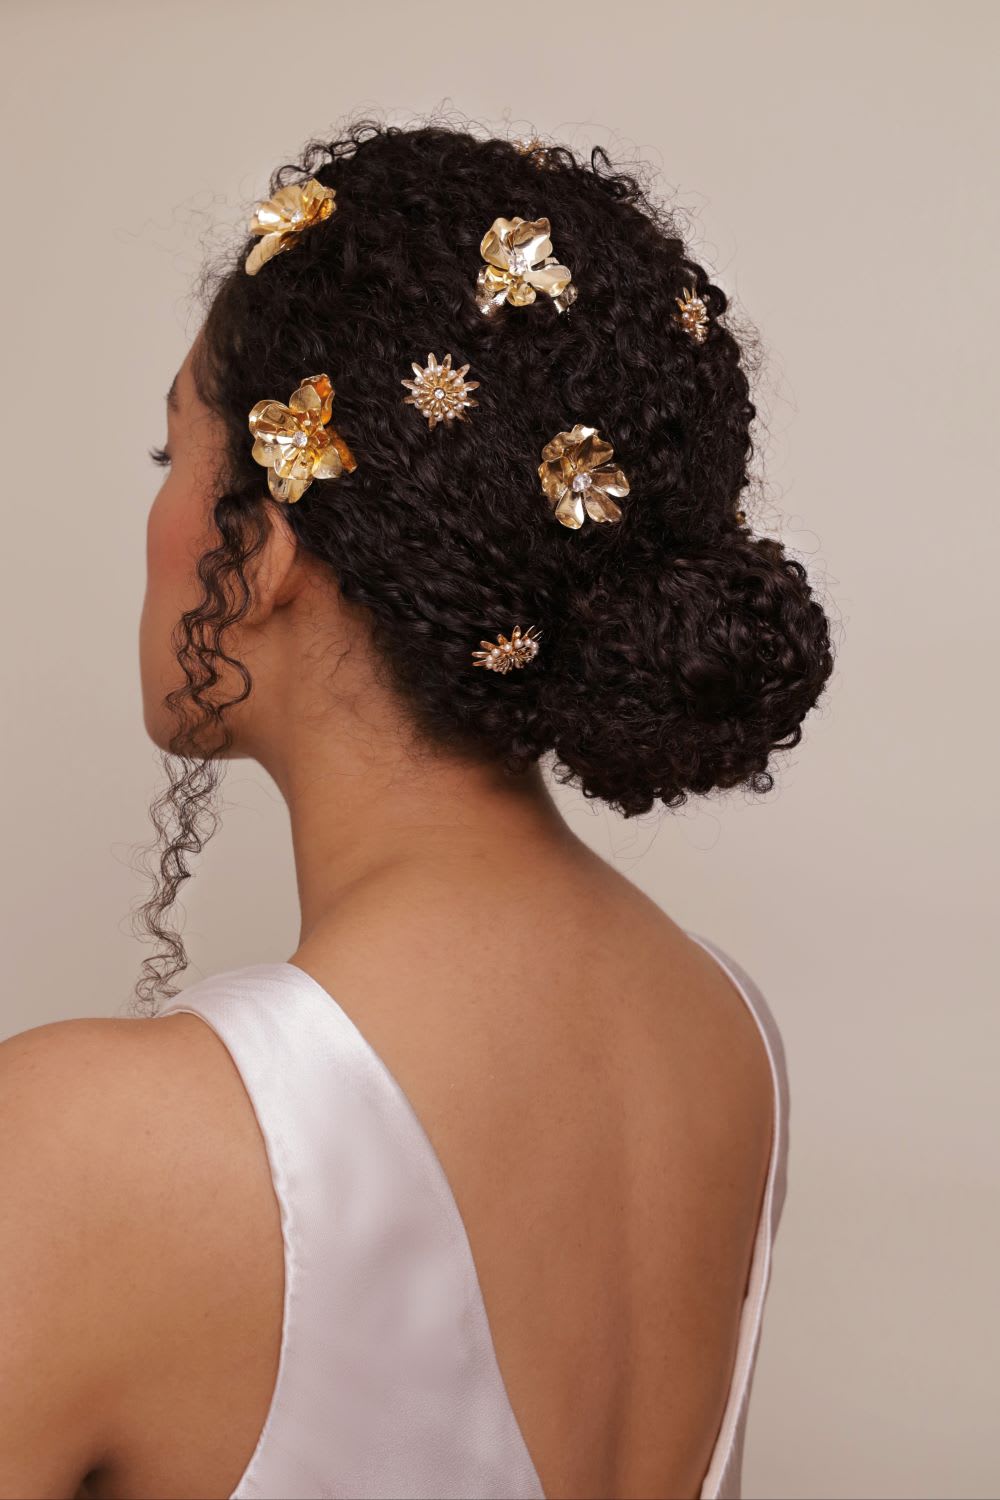 The Dreamiest Curly Wedding Hairstyle  Fashion Blog